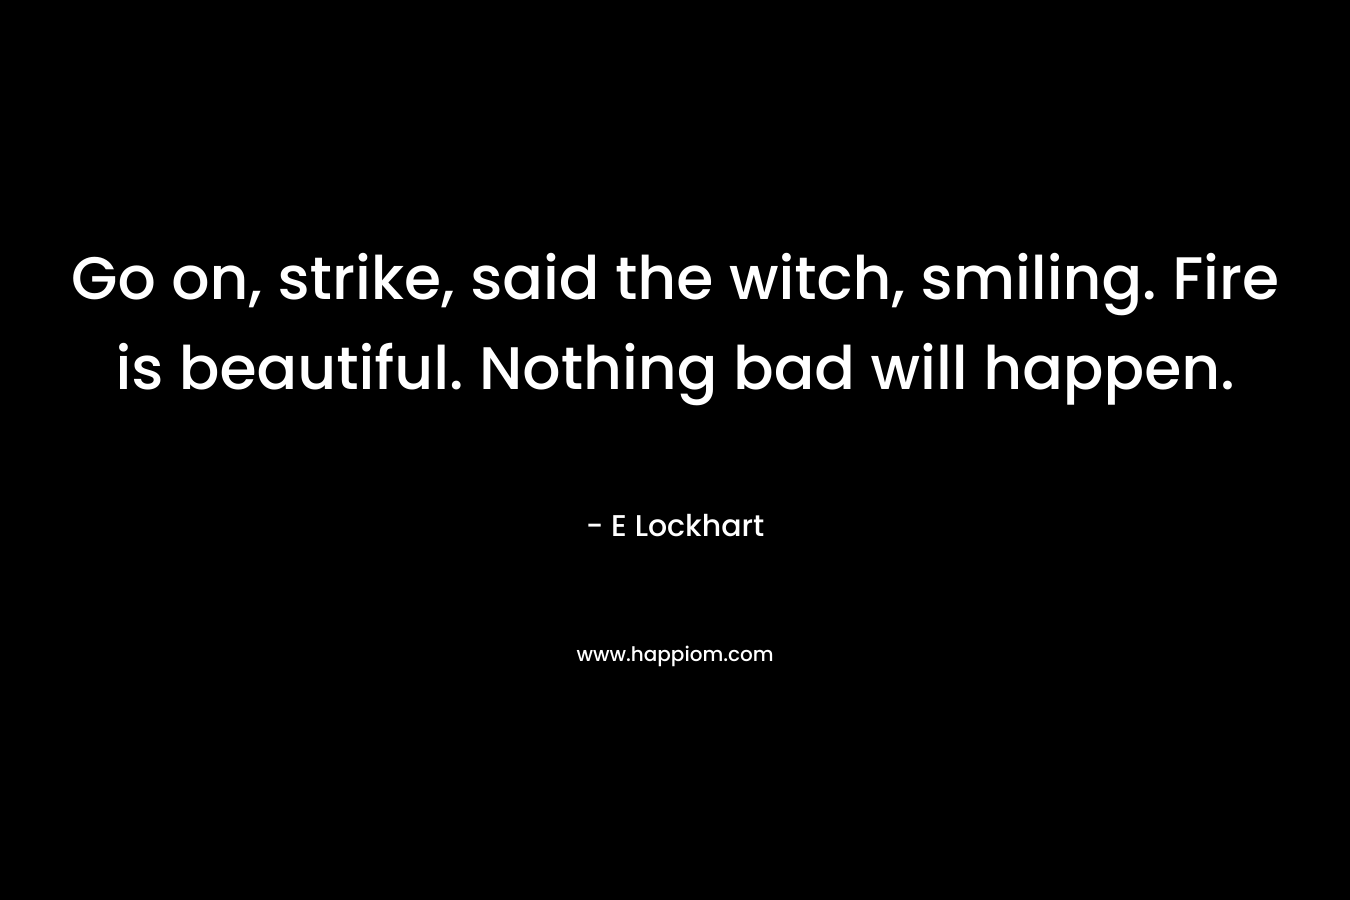 Go on, strike, said the witch, smiling. Fire is beautiful. Nothing bad will happen. – E Lockhart